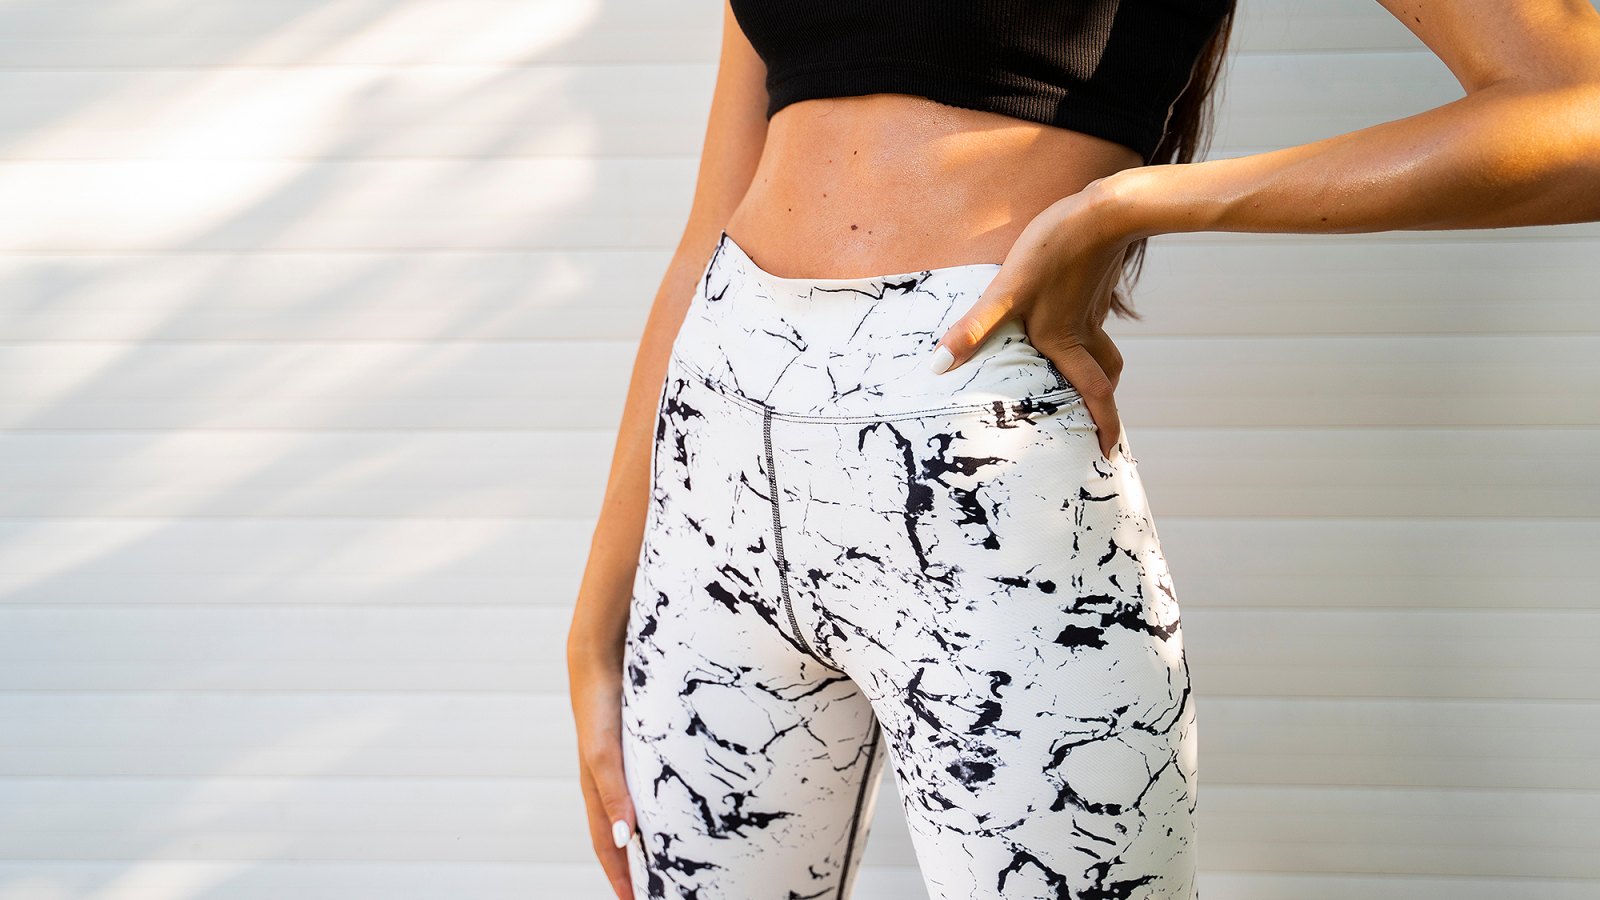 SweatyRocks Leggings Are Seriously Stylish Enough to Wear to Work